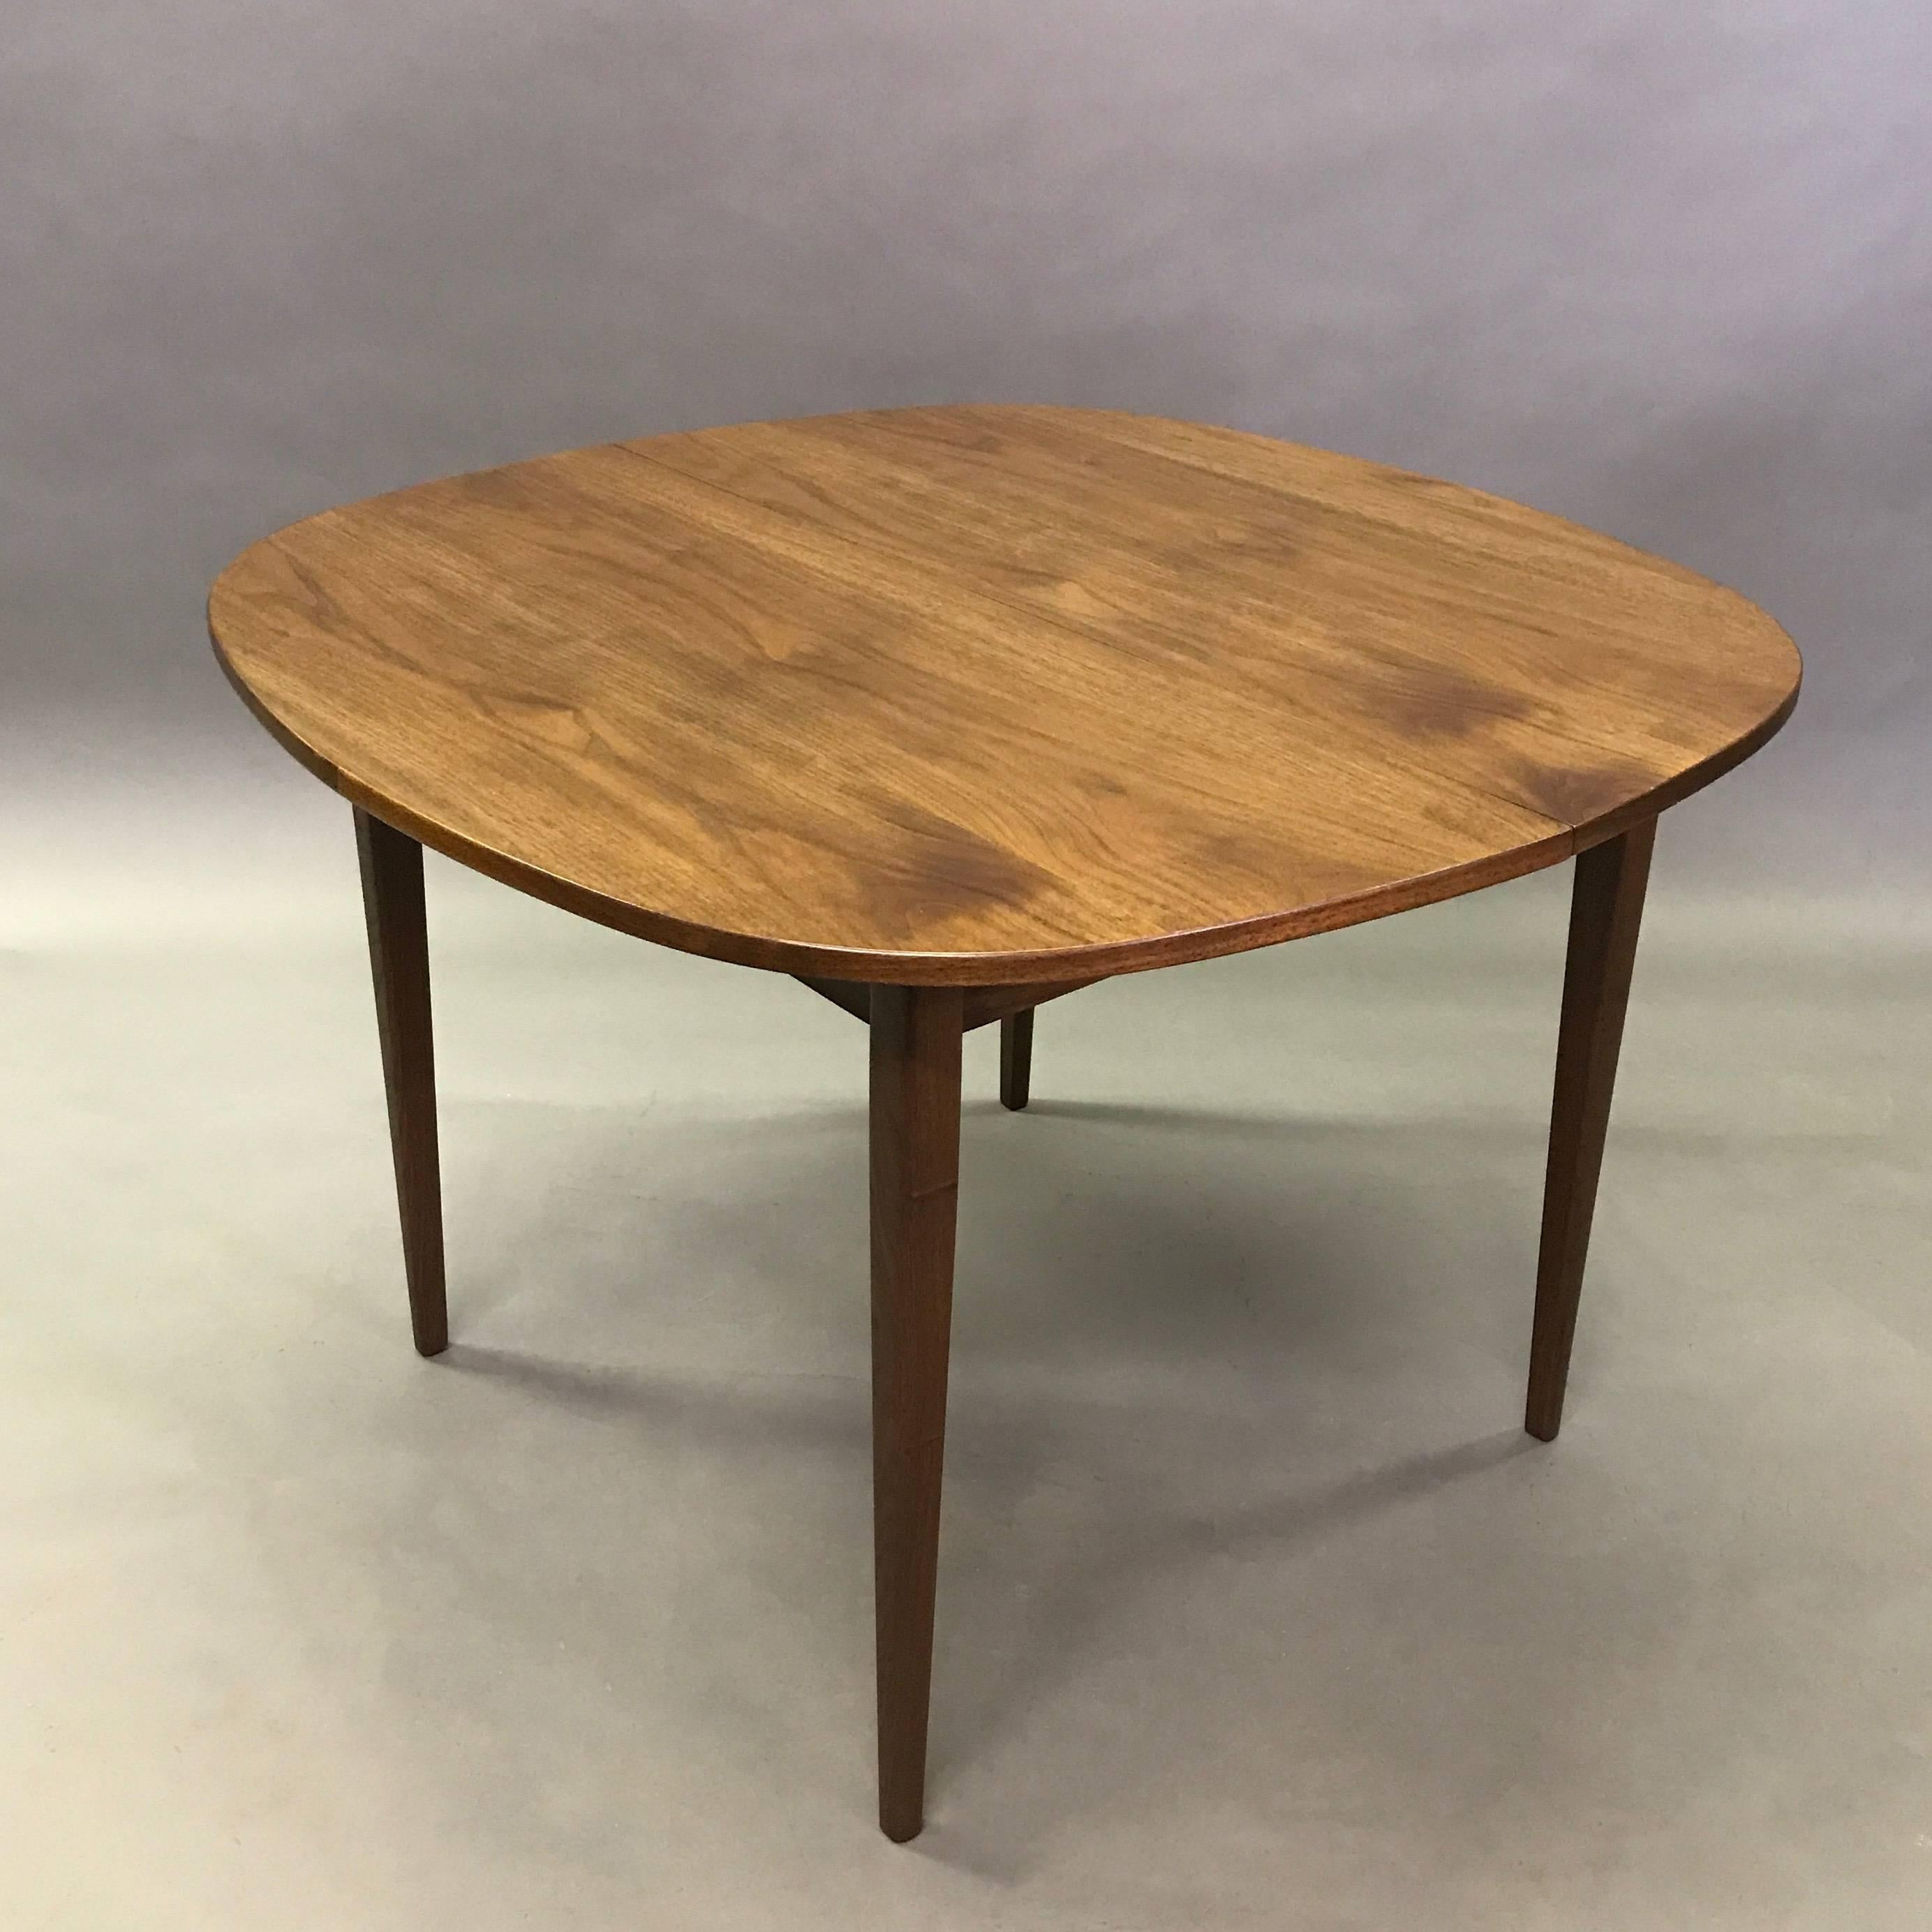 Nicely proportioned, Mid-Century Modern, solid walnut, dining table with rounded edges and tapered legs. The legs can be dismantled for transportation.